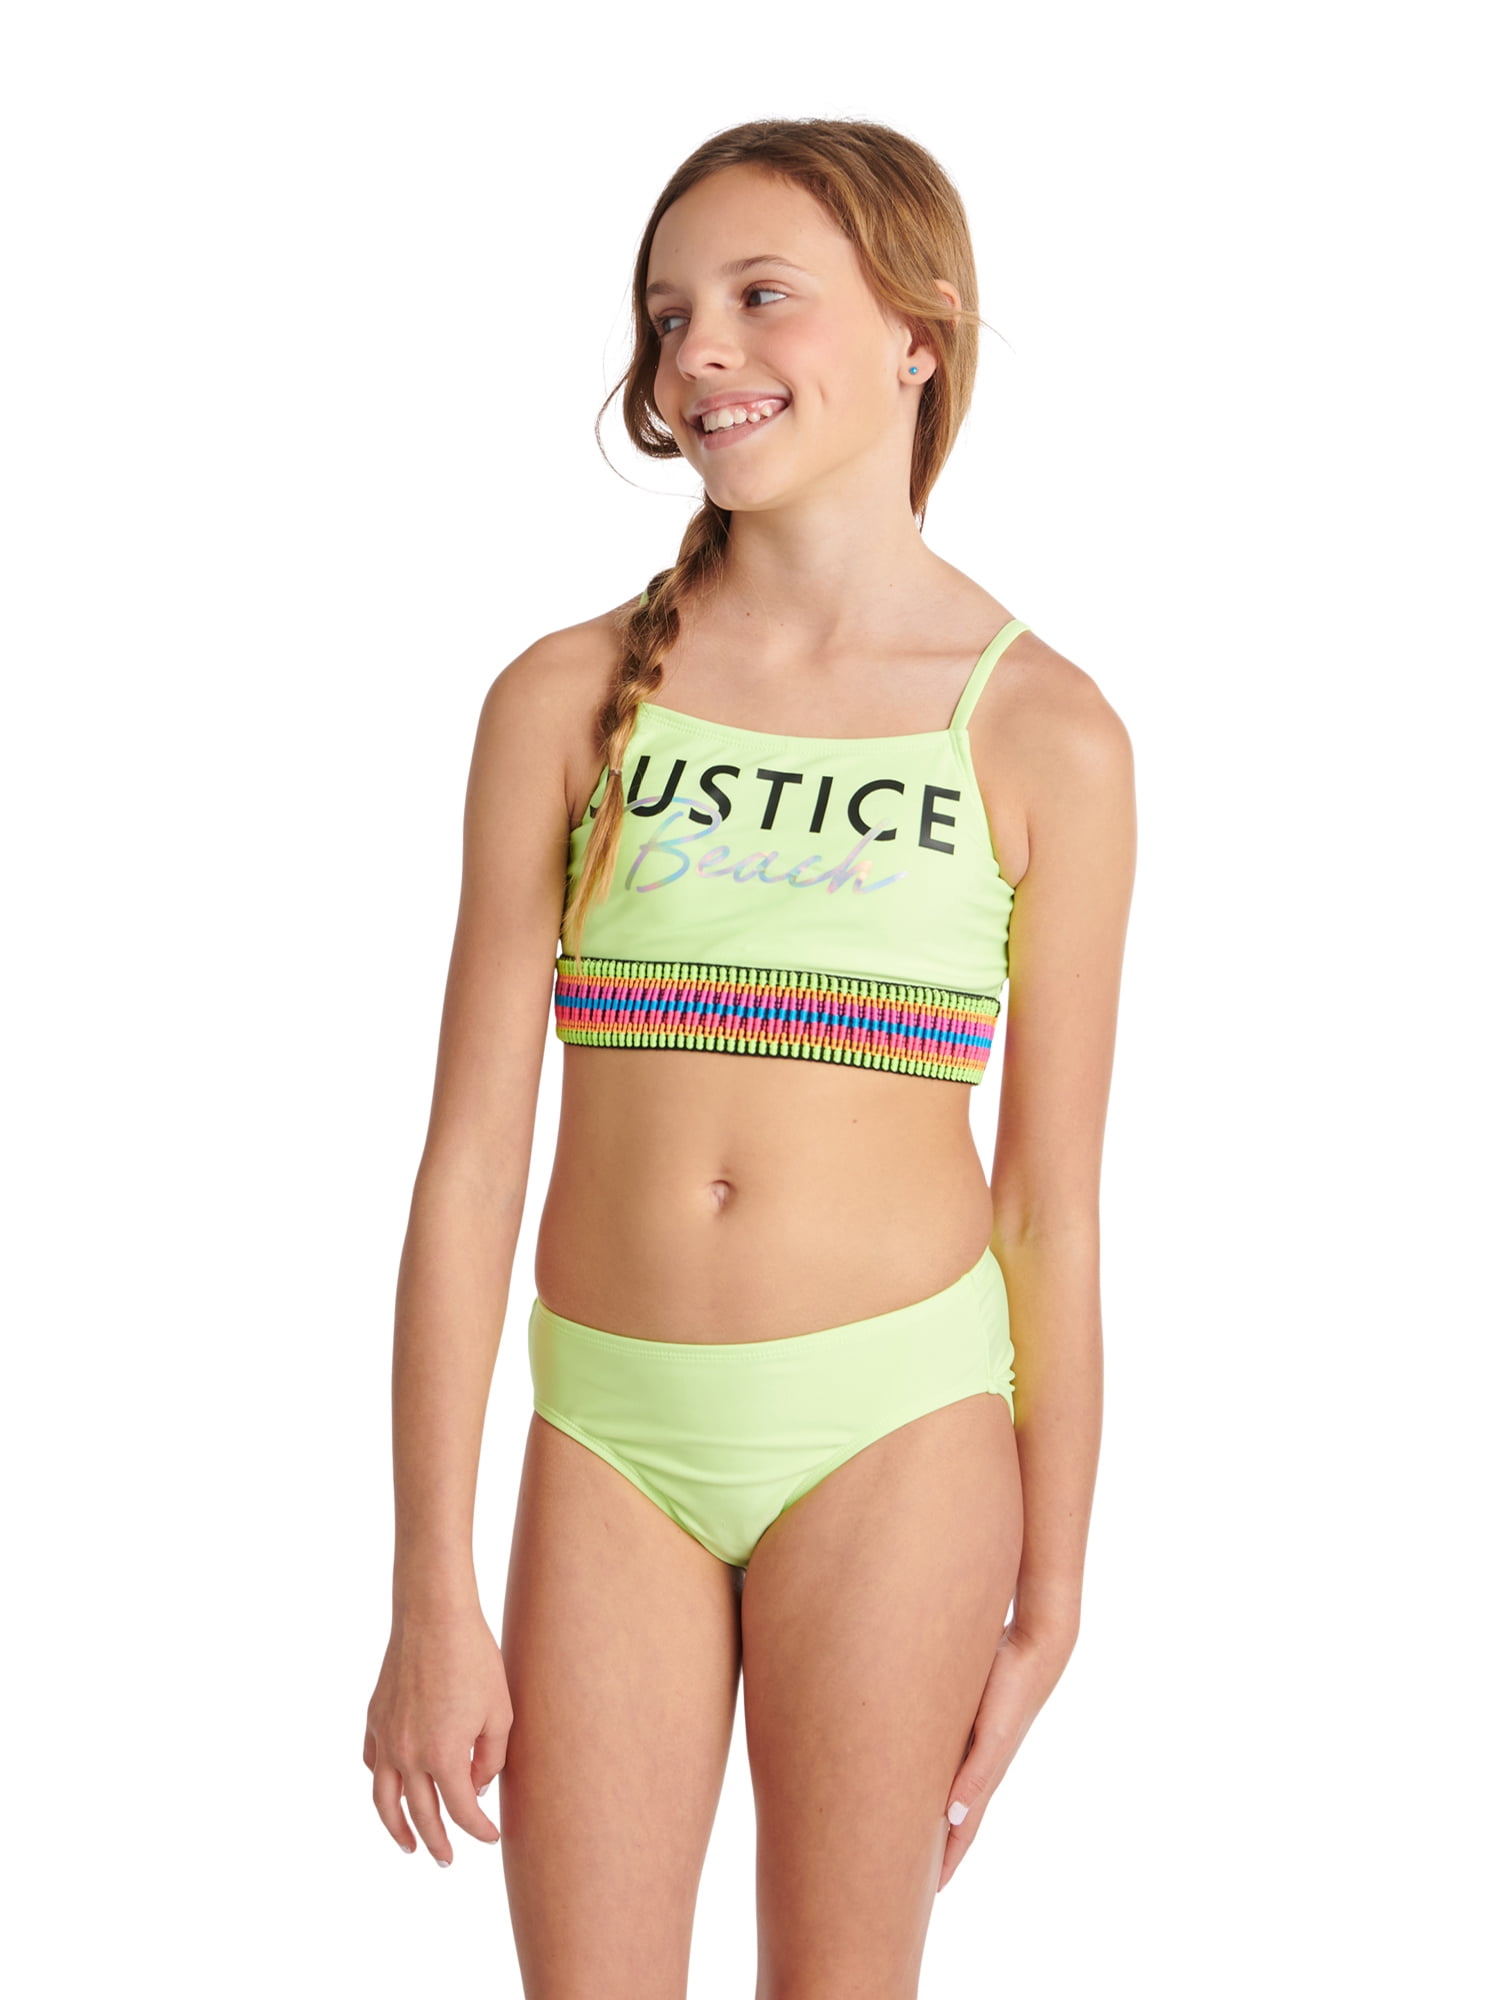 Details about   NWT Girls Justice 2-Piece Multi-Color Swimsuit 